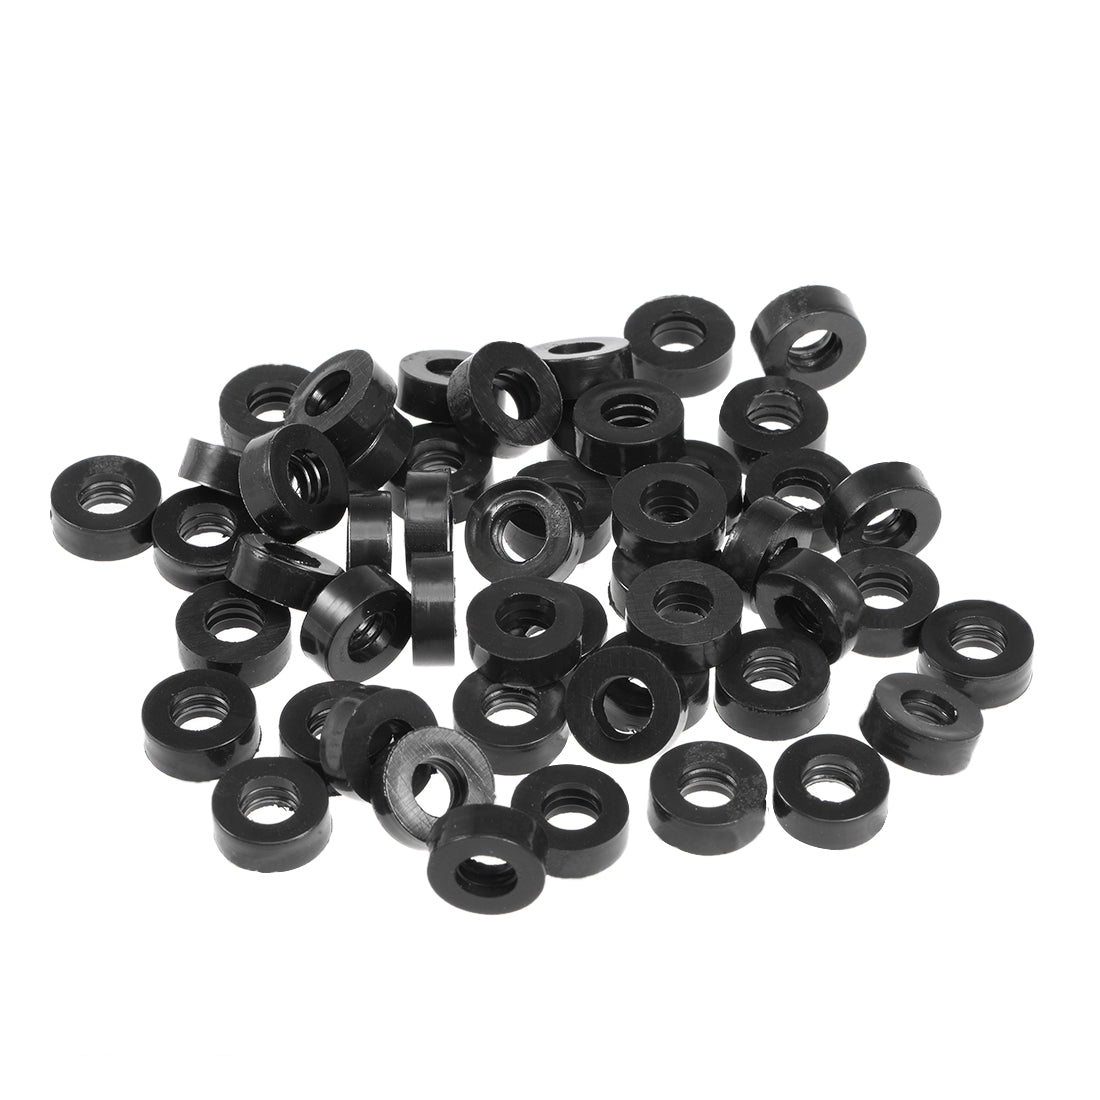 uxcell Uxcell Rubber Flat Washers Inner Diameter OD Thick 50 Pieces